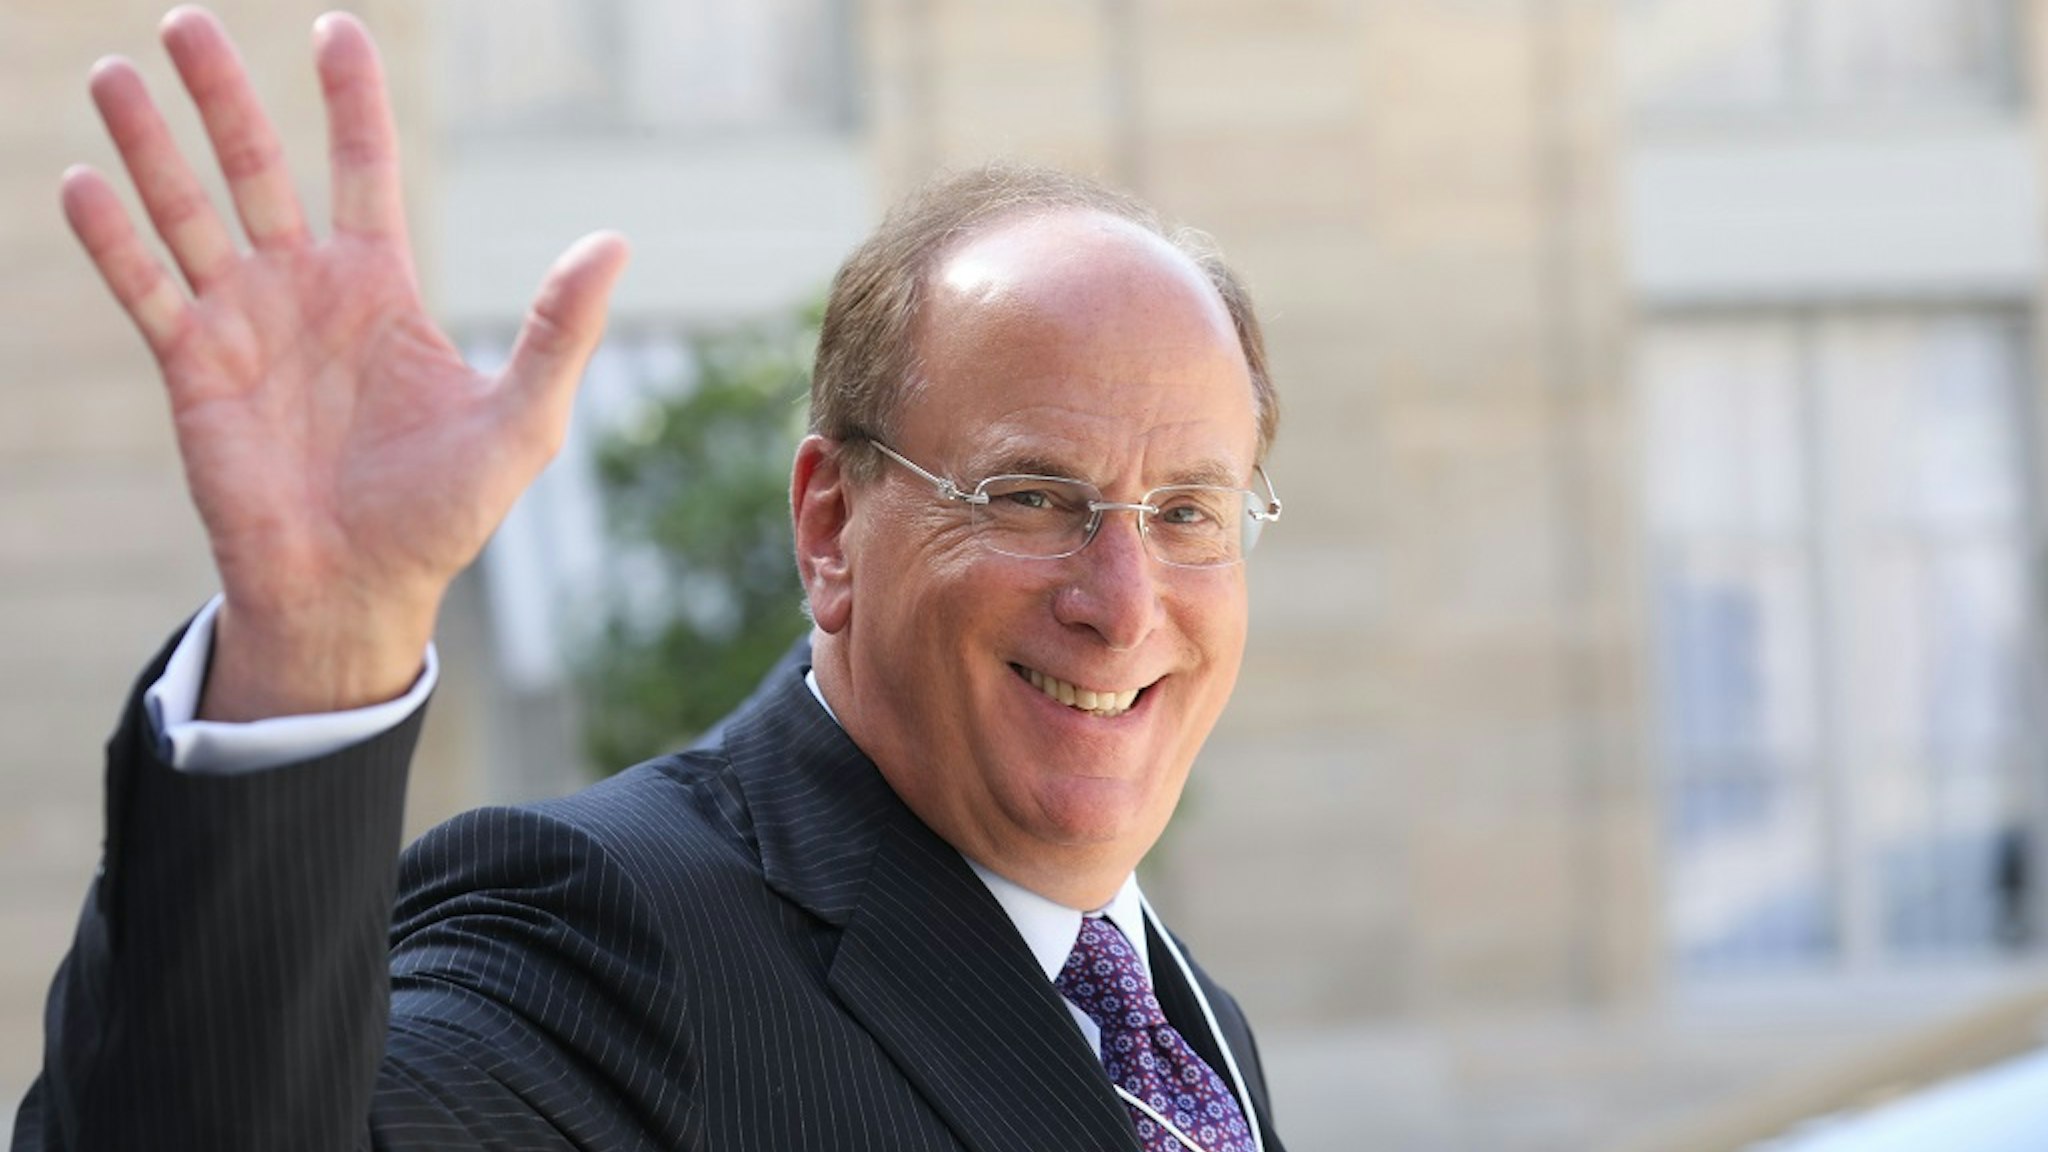 Chairman and CEO of BlackRock, Larry Fink (L) waves as he leaves a meeting about climate action investments with heads of sovereign wealth funds and French President at the Elysee Palace in Paris on July 10, 2019.